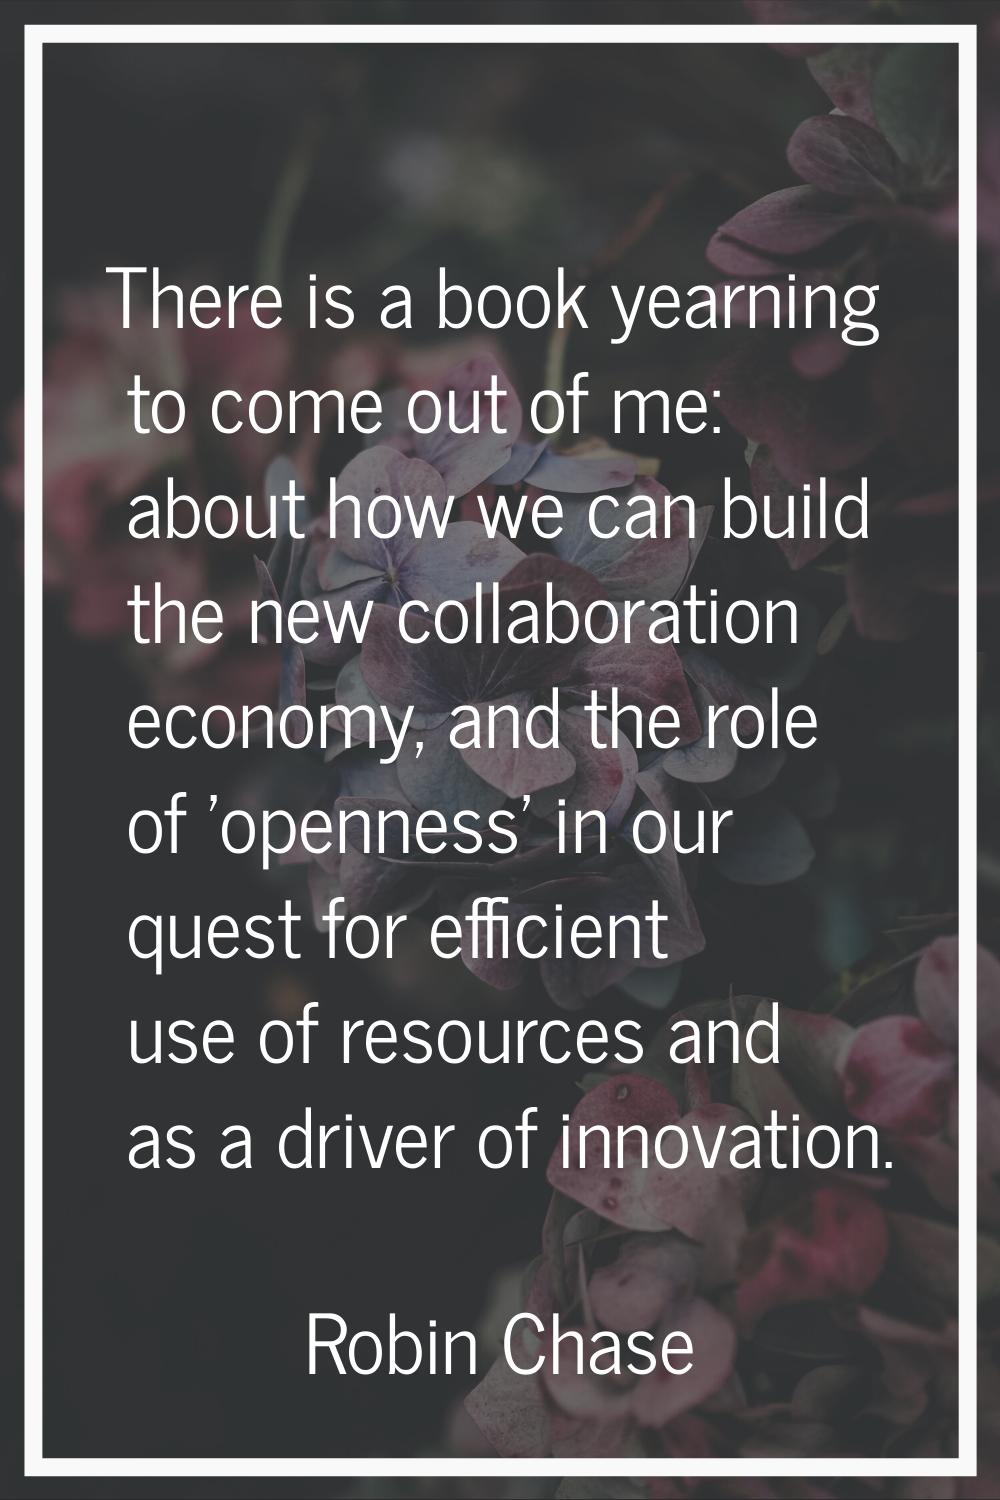 There is a book yearning to come out of me: about how we can build the new collaboration economy, a